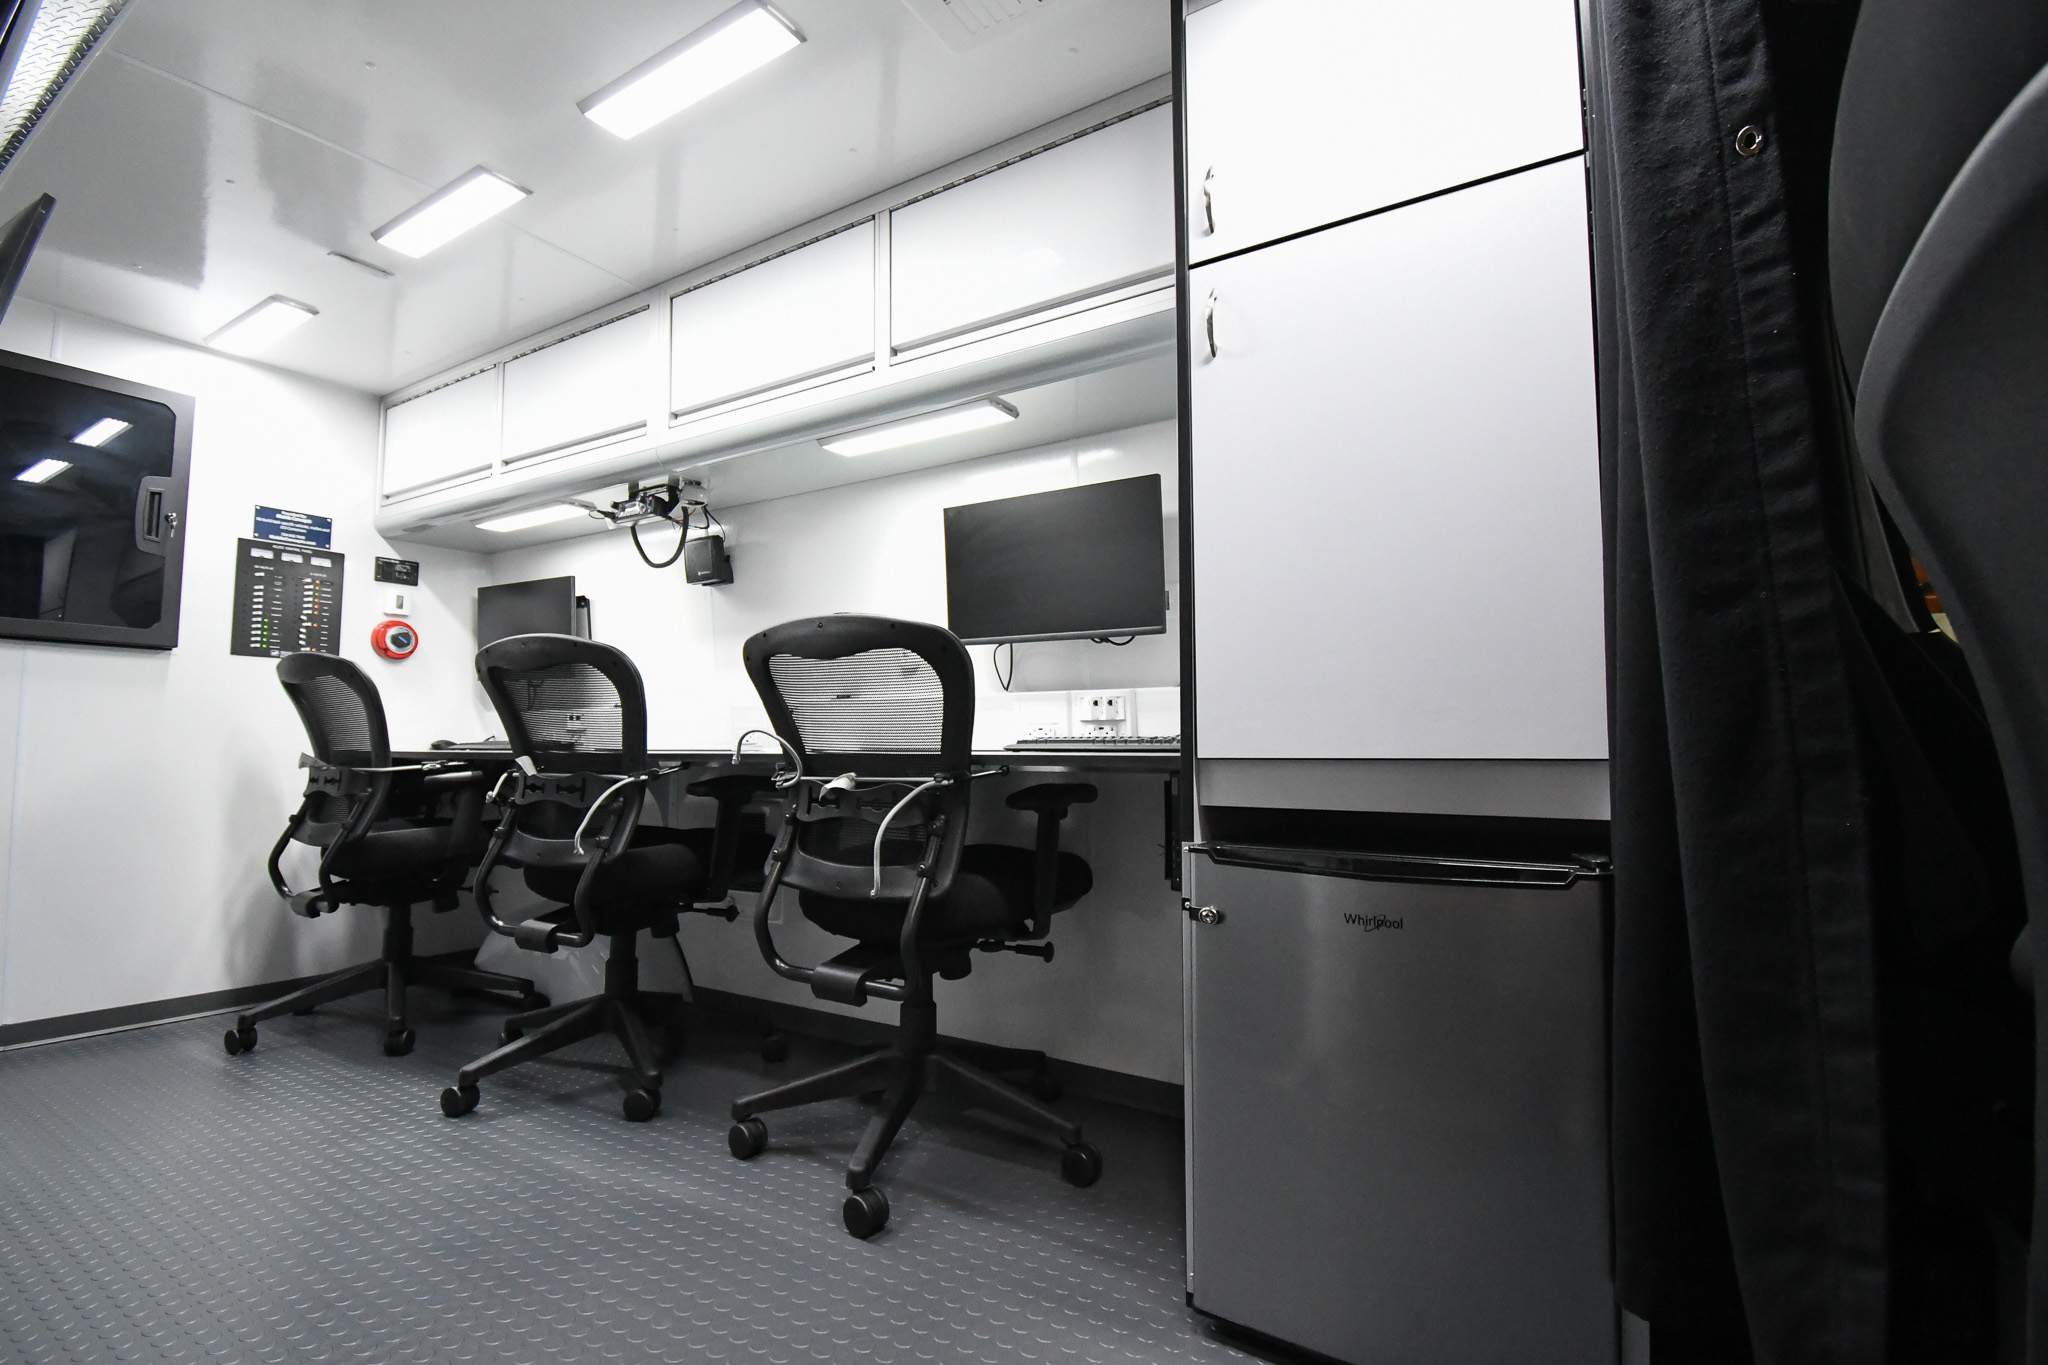 An interior view of the 3 workstations, refrigerator, cabinets, and wall-mounted electronics rack cabinet inside the unit made for the San Joaquin County Sheriff's Office.